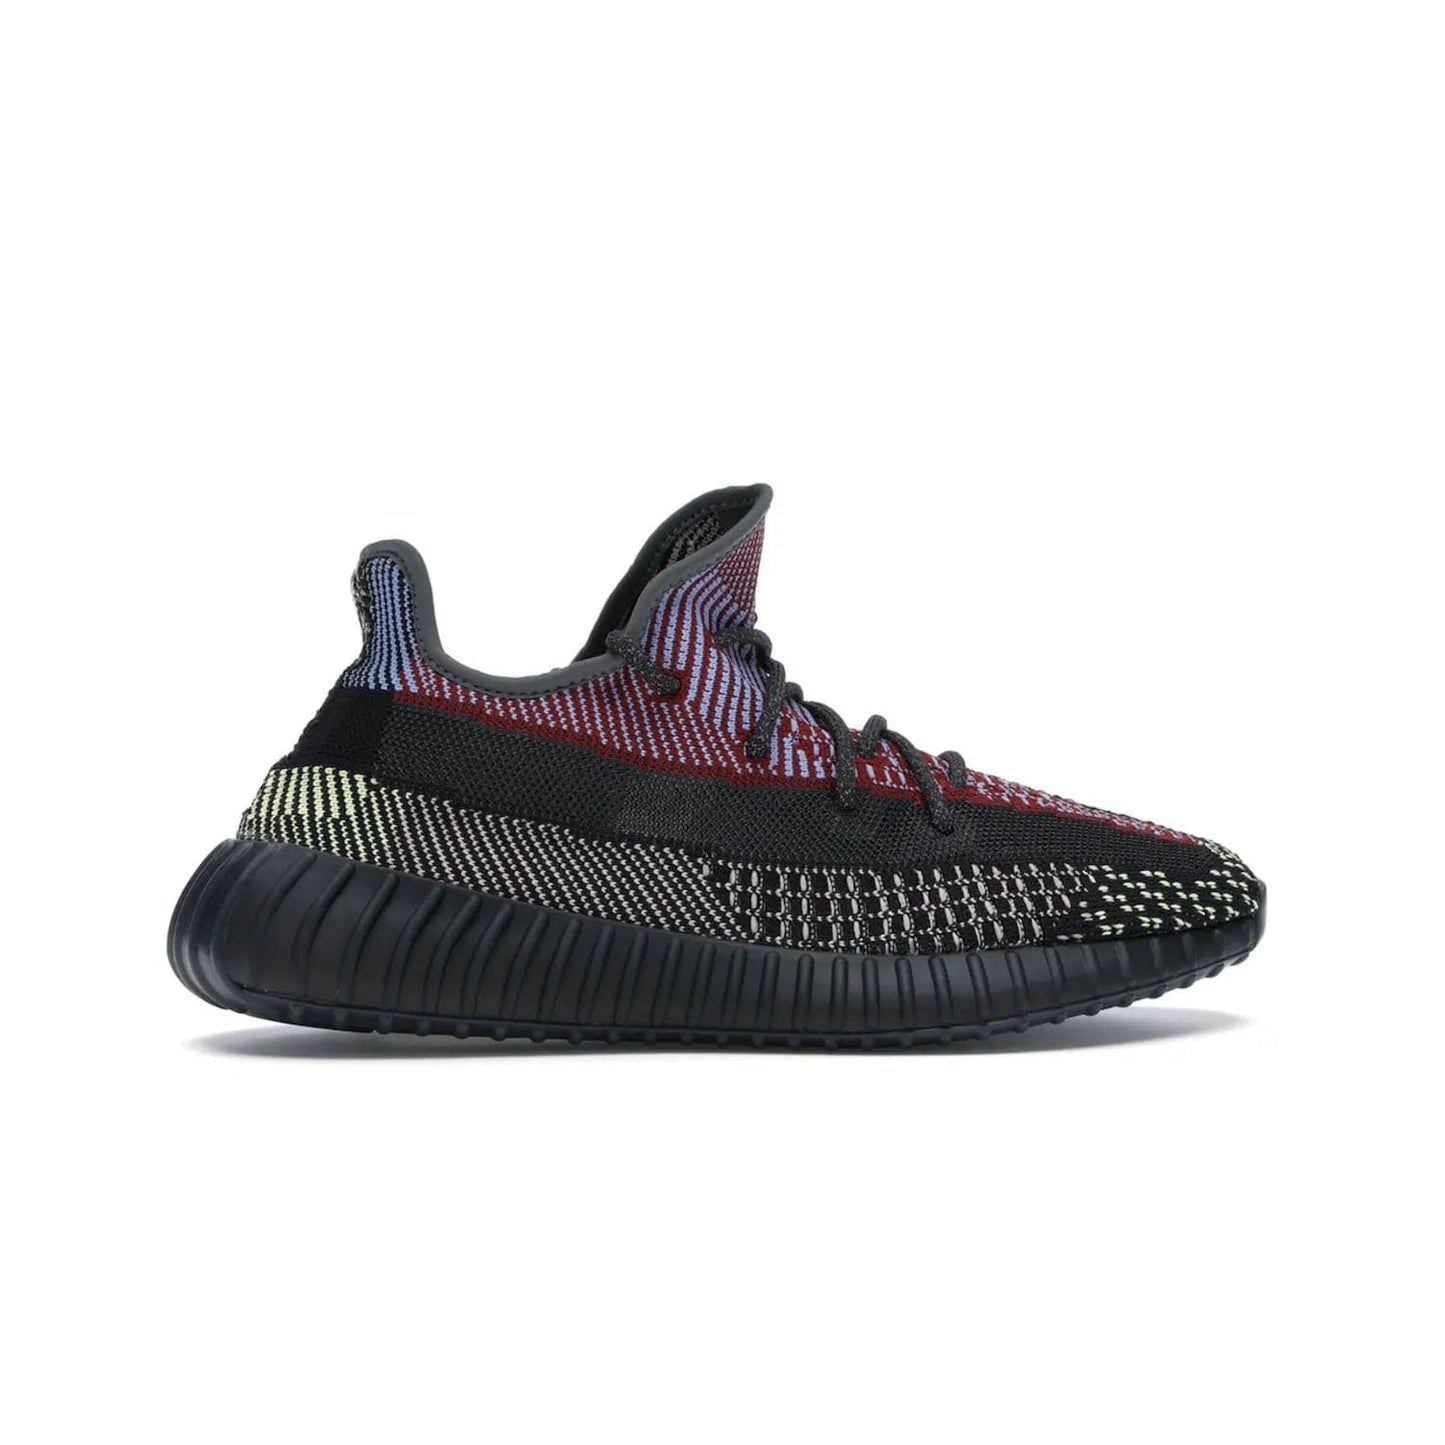 adidas Yeezy Boost 350 V2 Yecheil (Non-Reflective) - Image 36 - Only at www.BallersClubKickz.com - Make a statement with the eye-catching adidas Yeezy Boost 350 V2 Yecheil Non-Reflective. Featuring a spectrum of colorful hues, black upper, Boost cushioning, and black side stripe, the sneaker brings a luxe yet playful finish to any outfit.